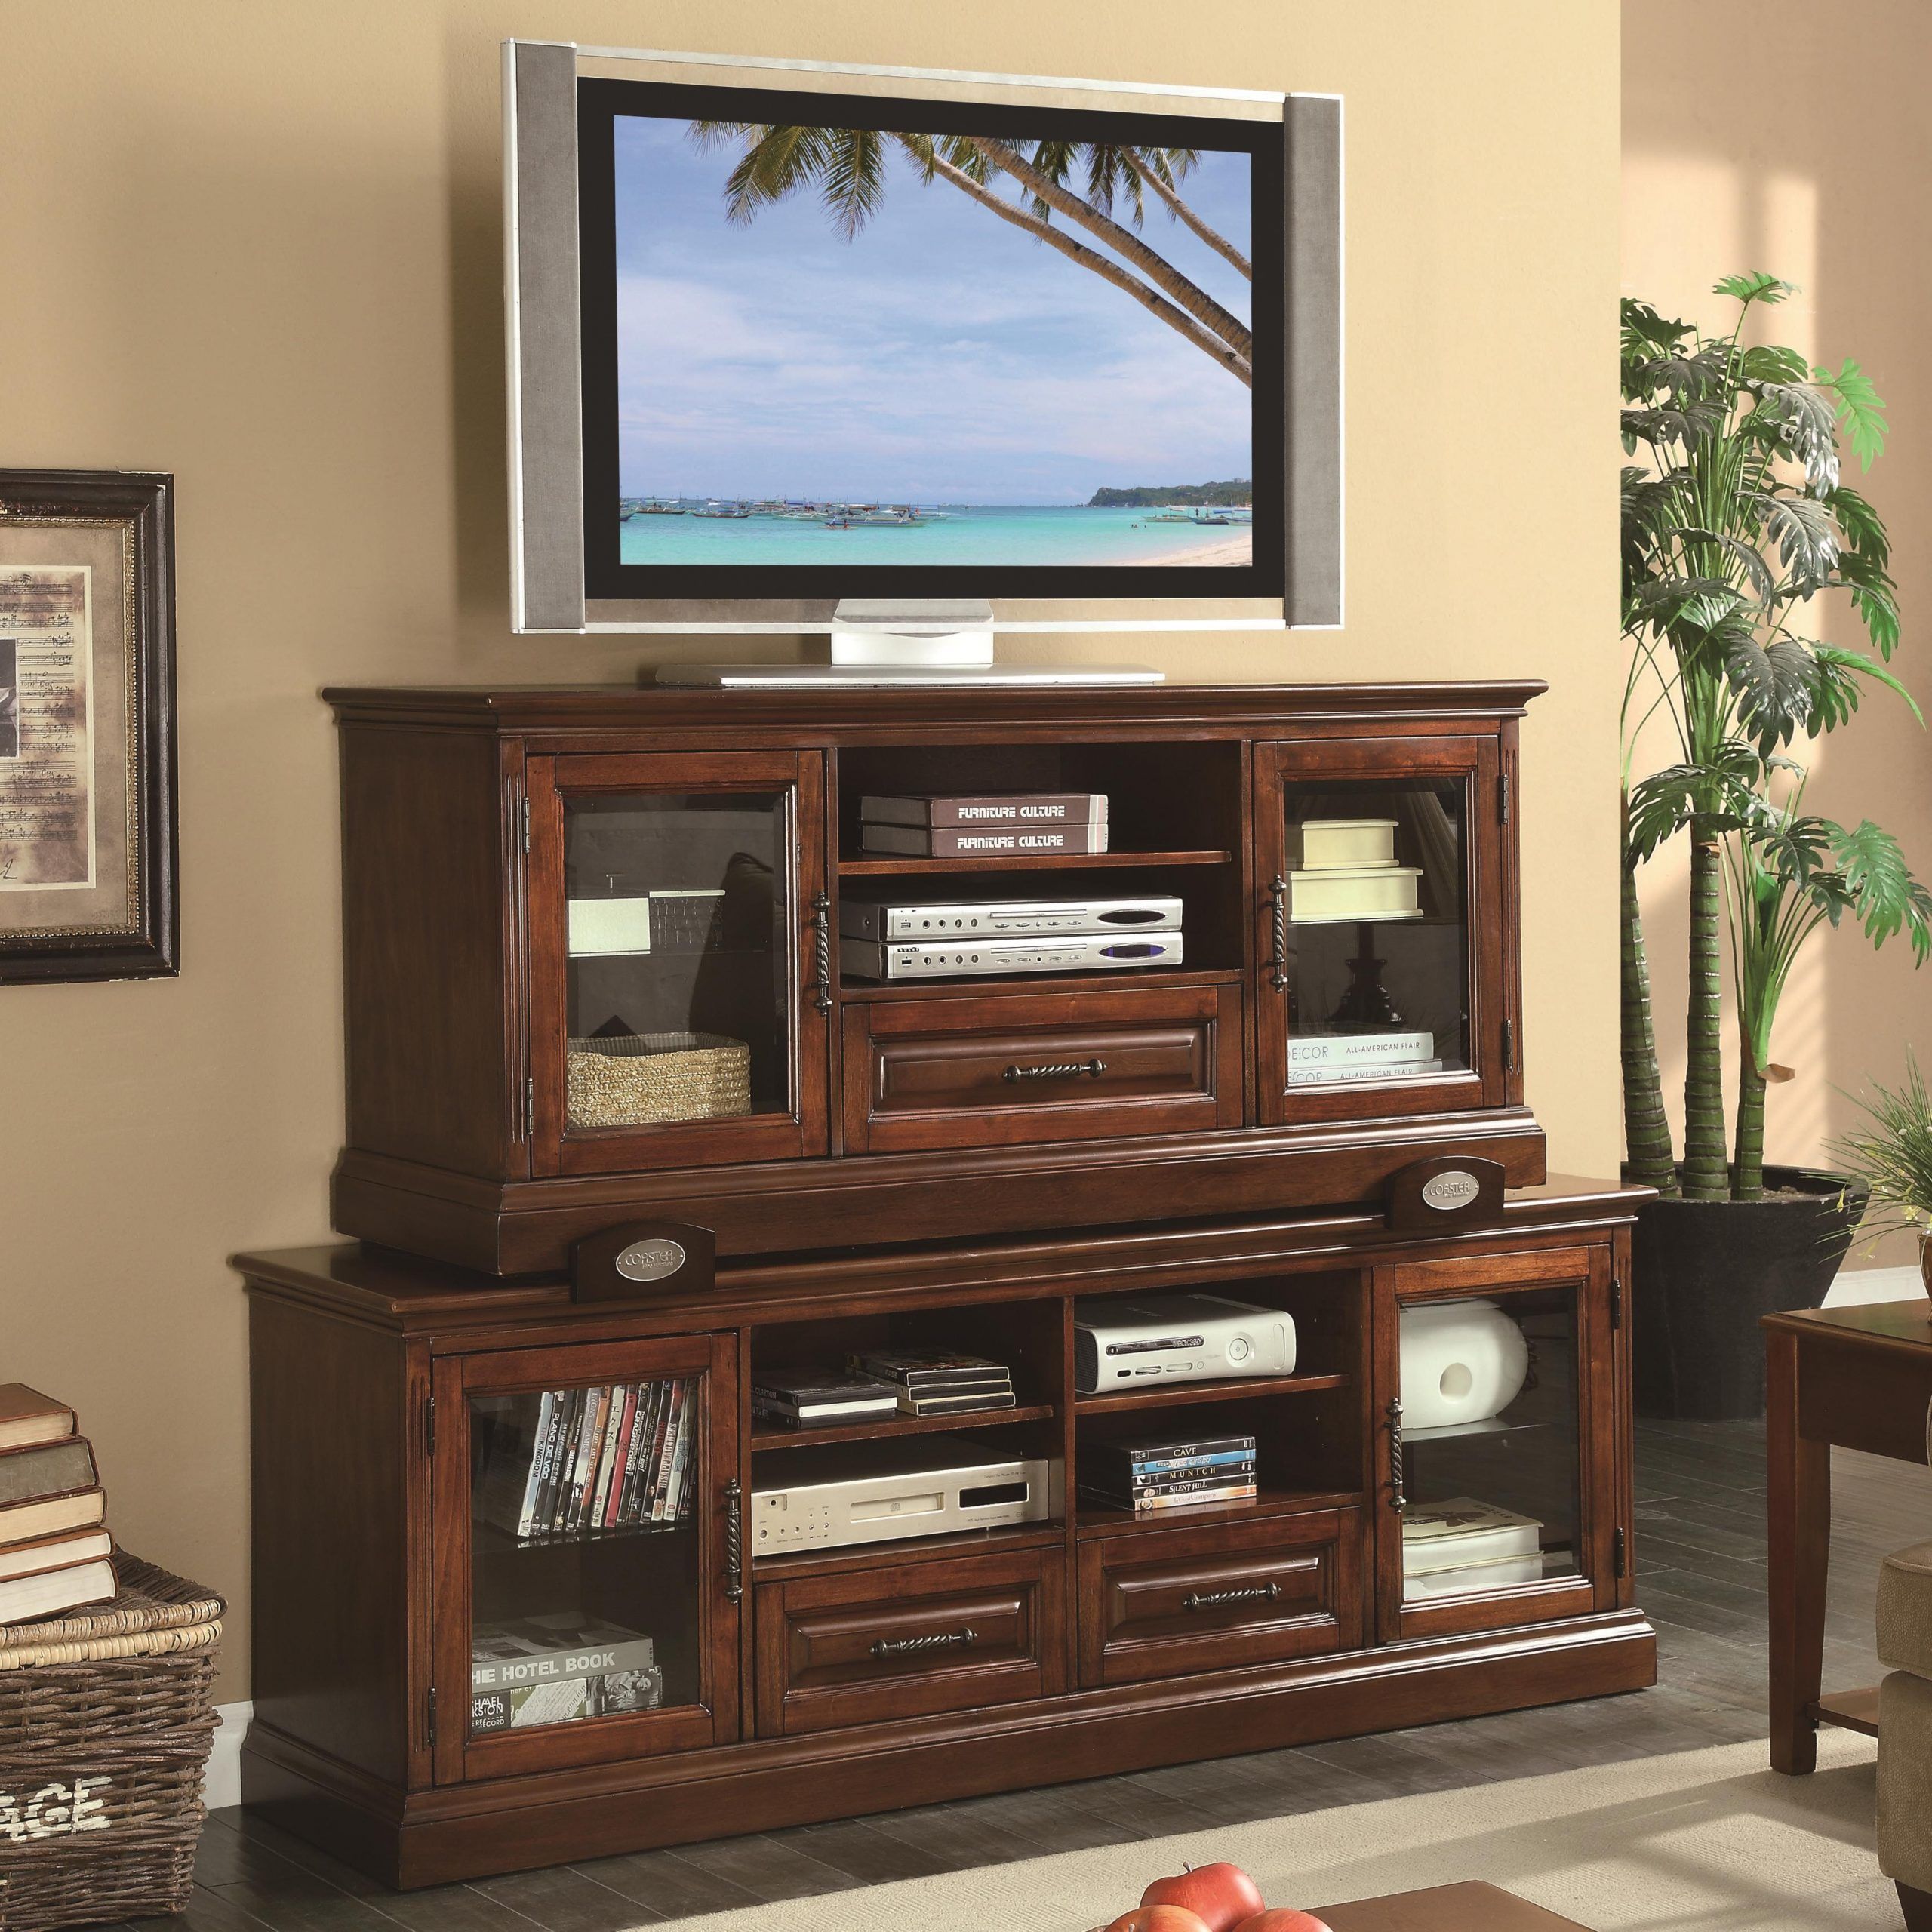 Tv Stands Protective Stacking Panels | Quality Furniture With Regard To Tv Tables (View 1 of 15)